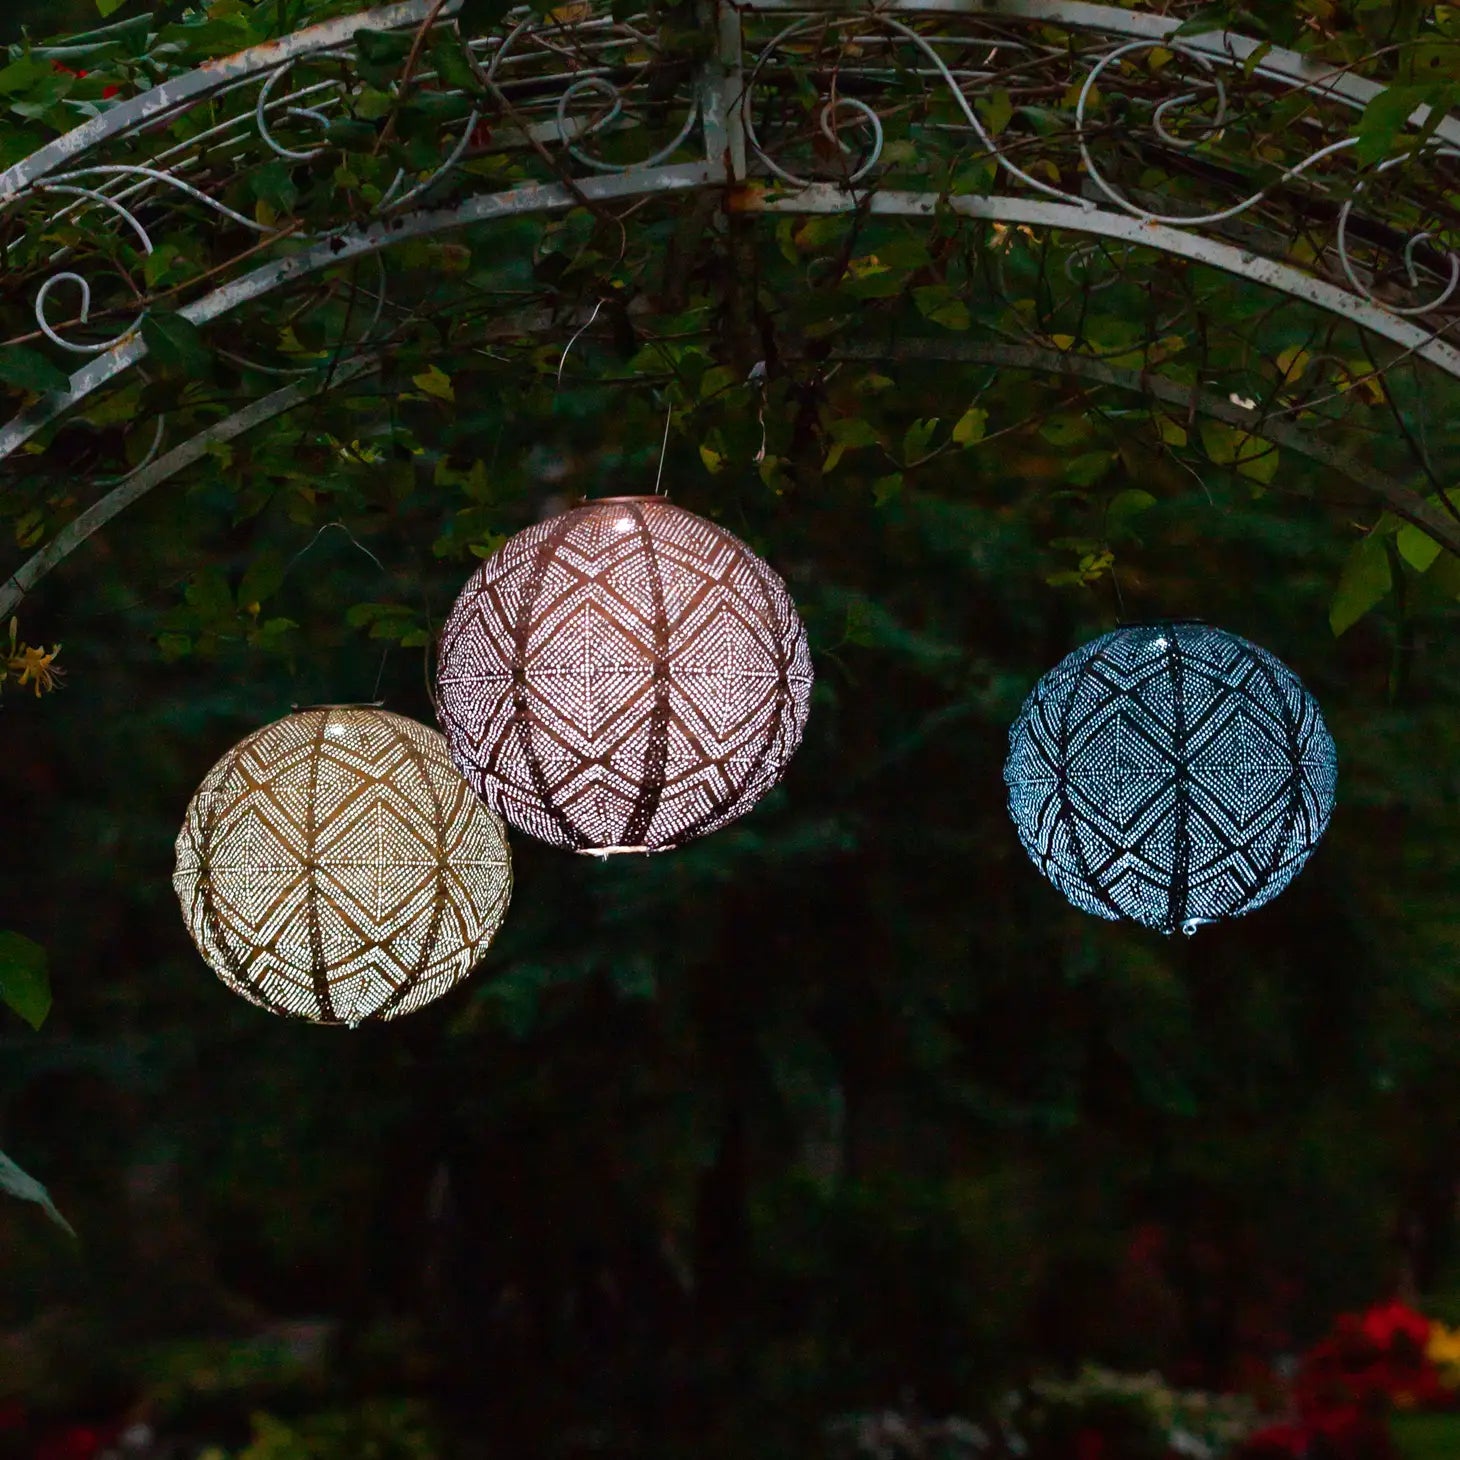 Image showing how these lanterns look while lite at night.